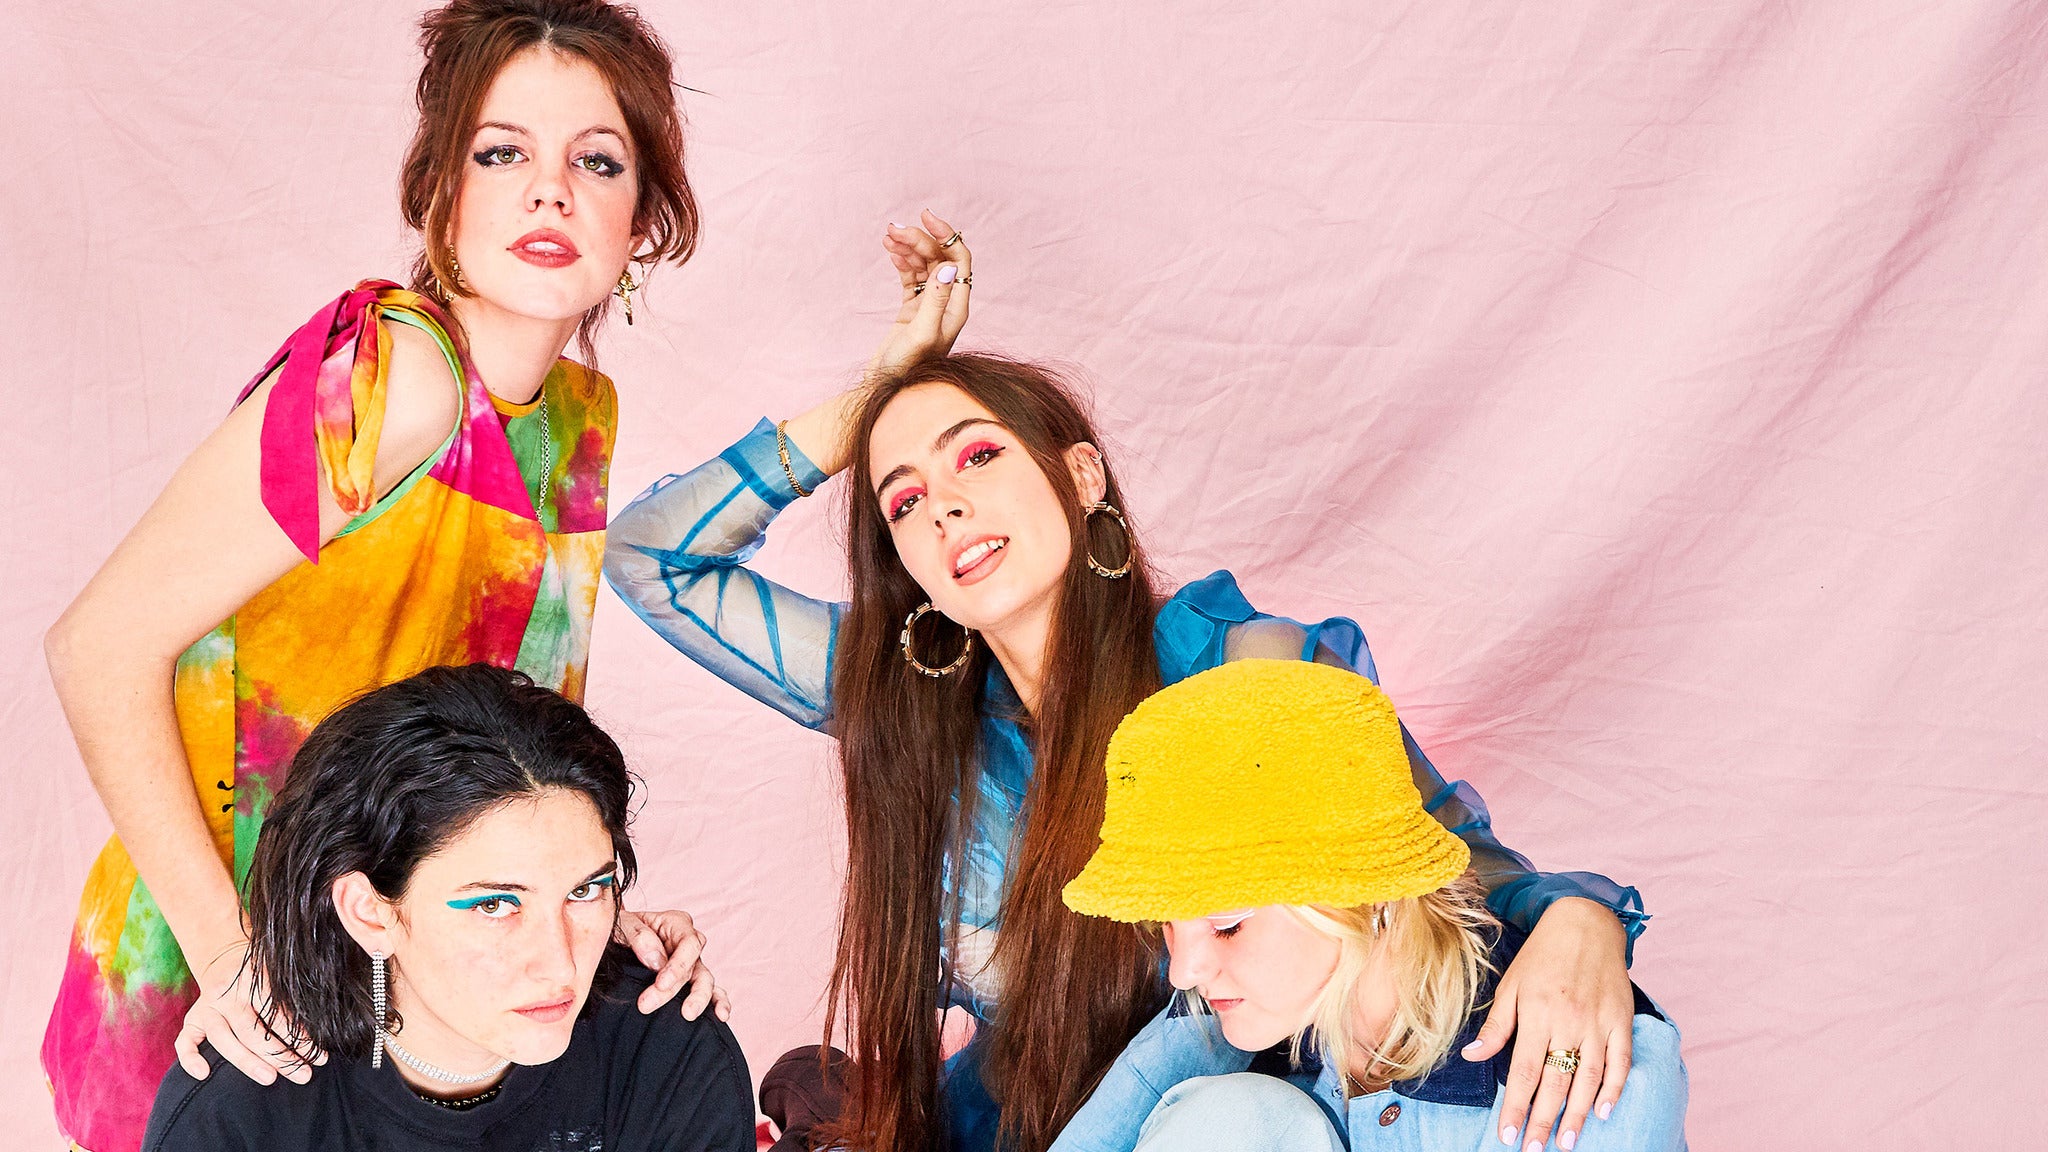 Hinds in Toronto promo photo for Artist presale offer code